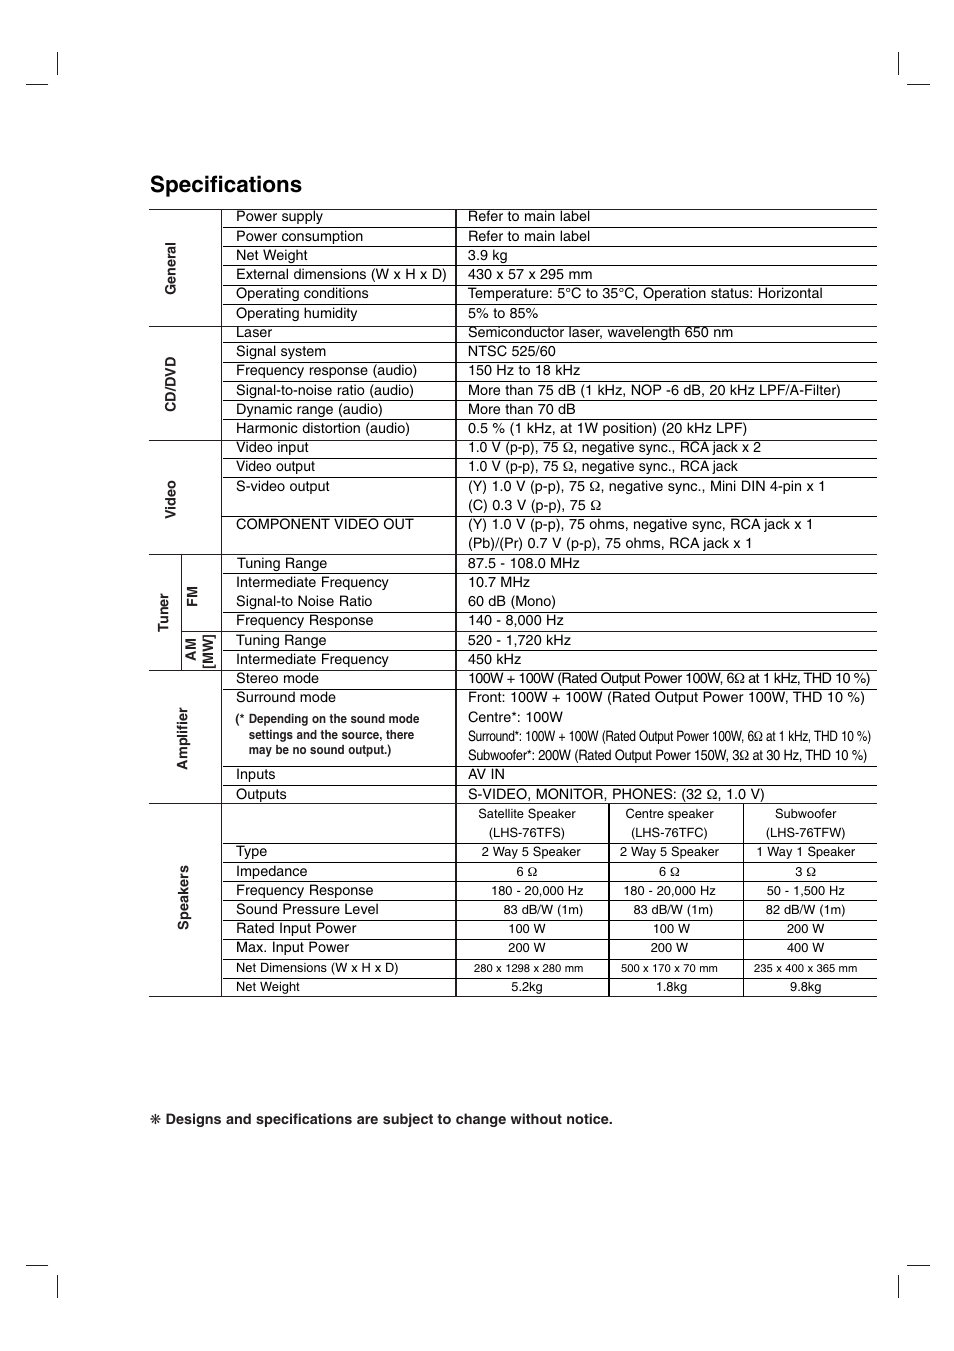 Specifications | LG LH-T755 User Manual | Page 28 / 29